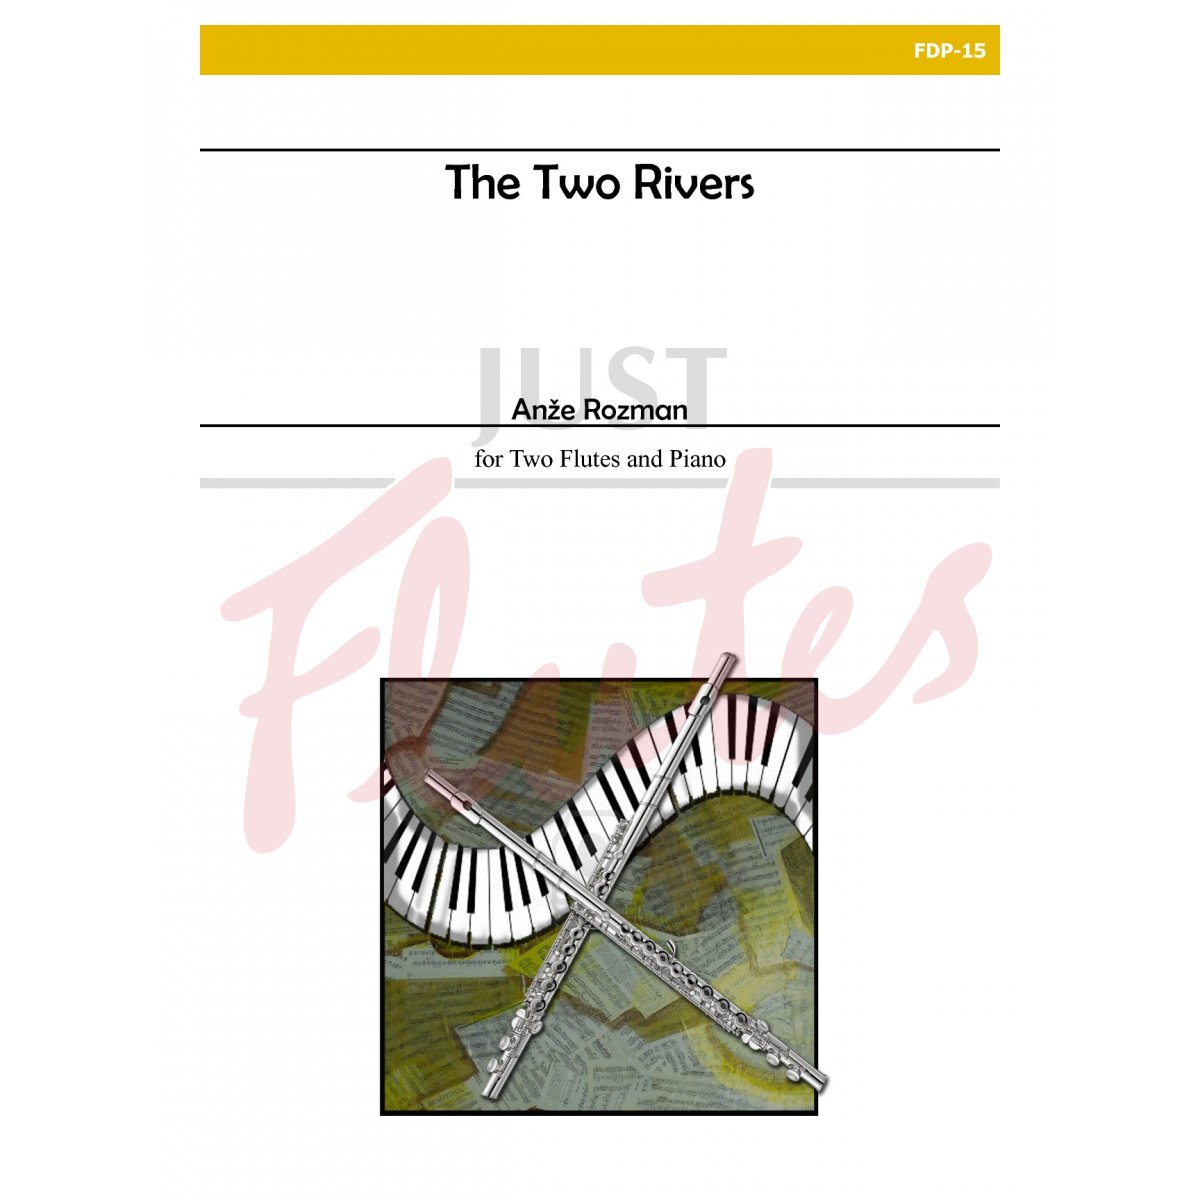 The Two Rivers for Two Flutes and Piano